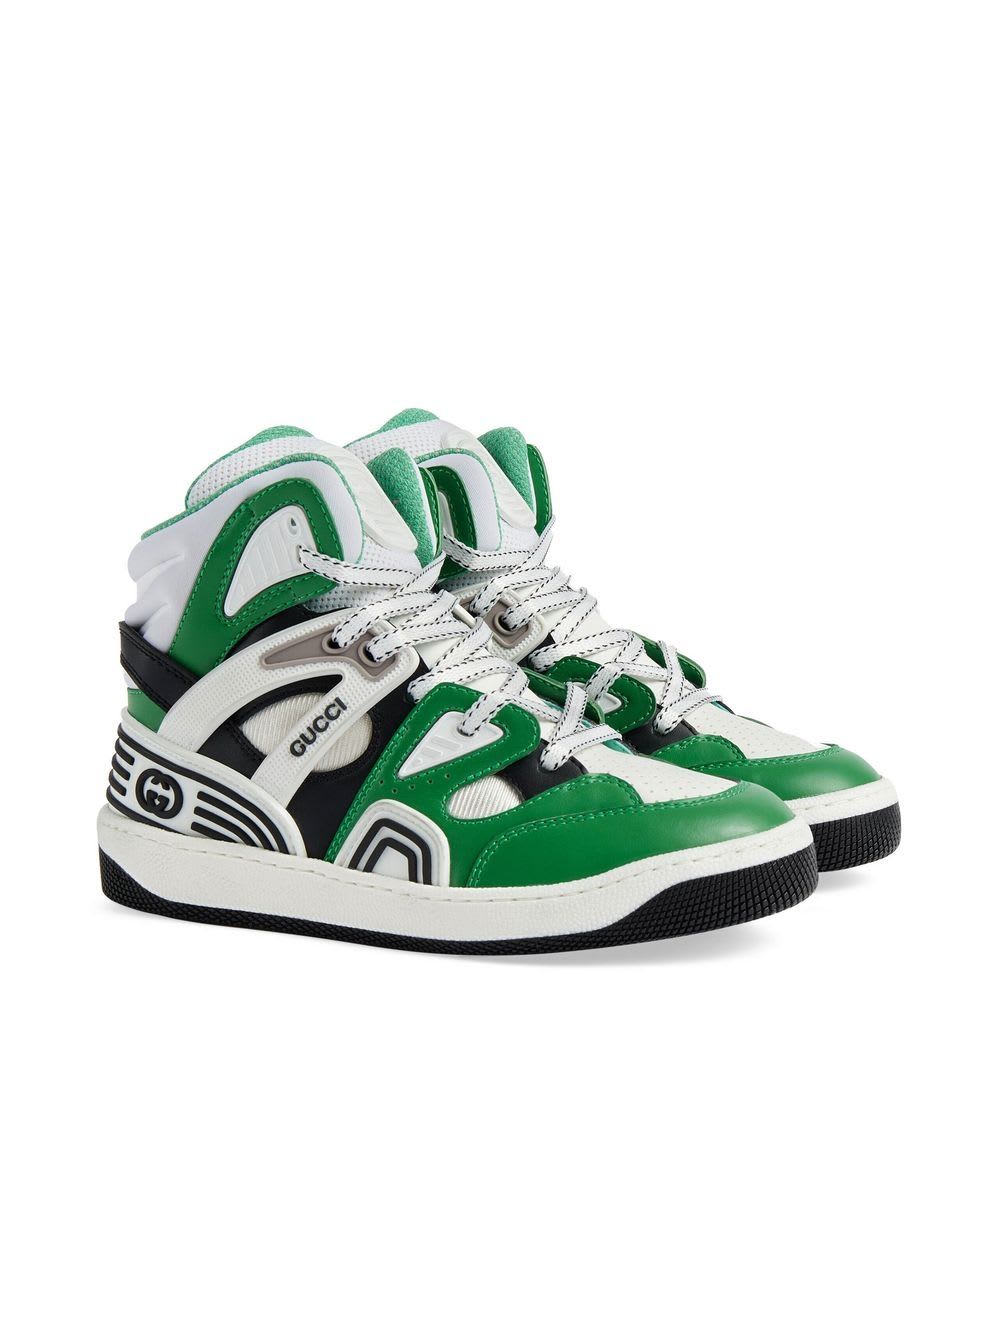 Gucci Green Leather Sneakers